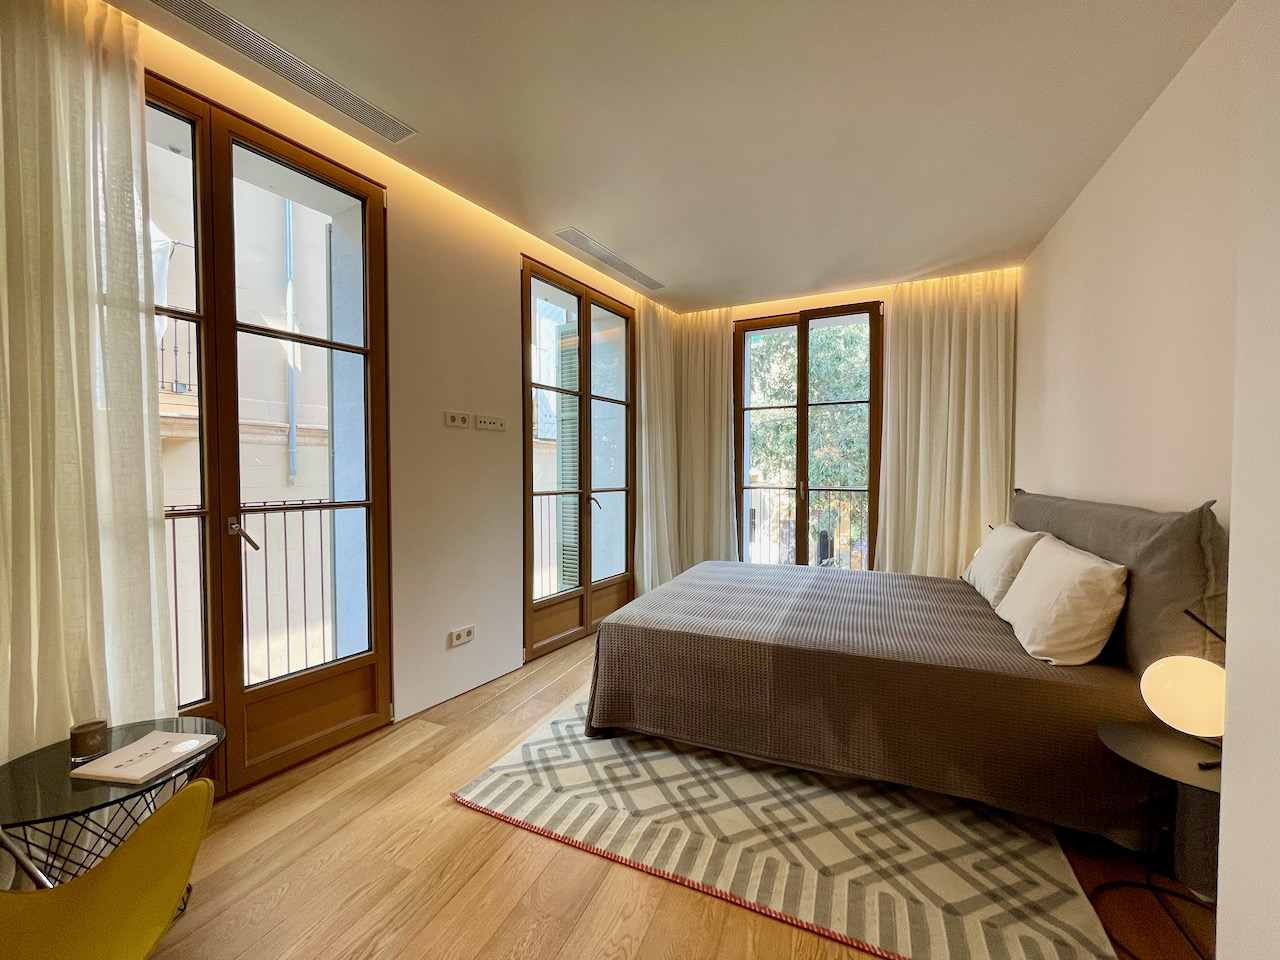 Elegant luxury apartment in a Malloquin style building in the Old Town of Palma